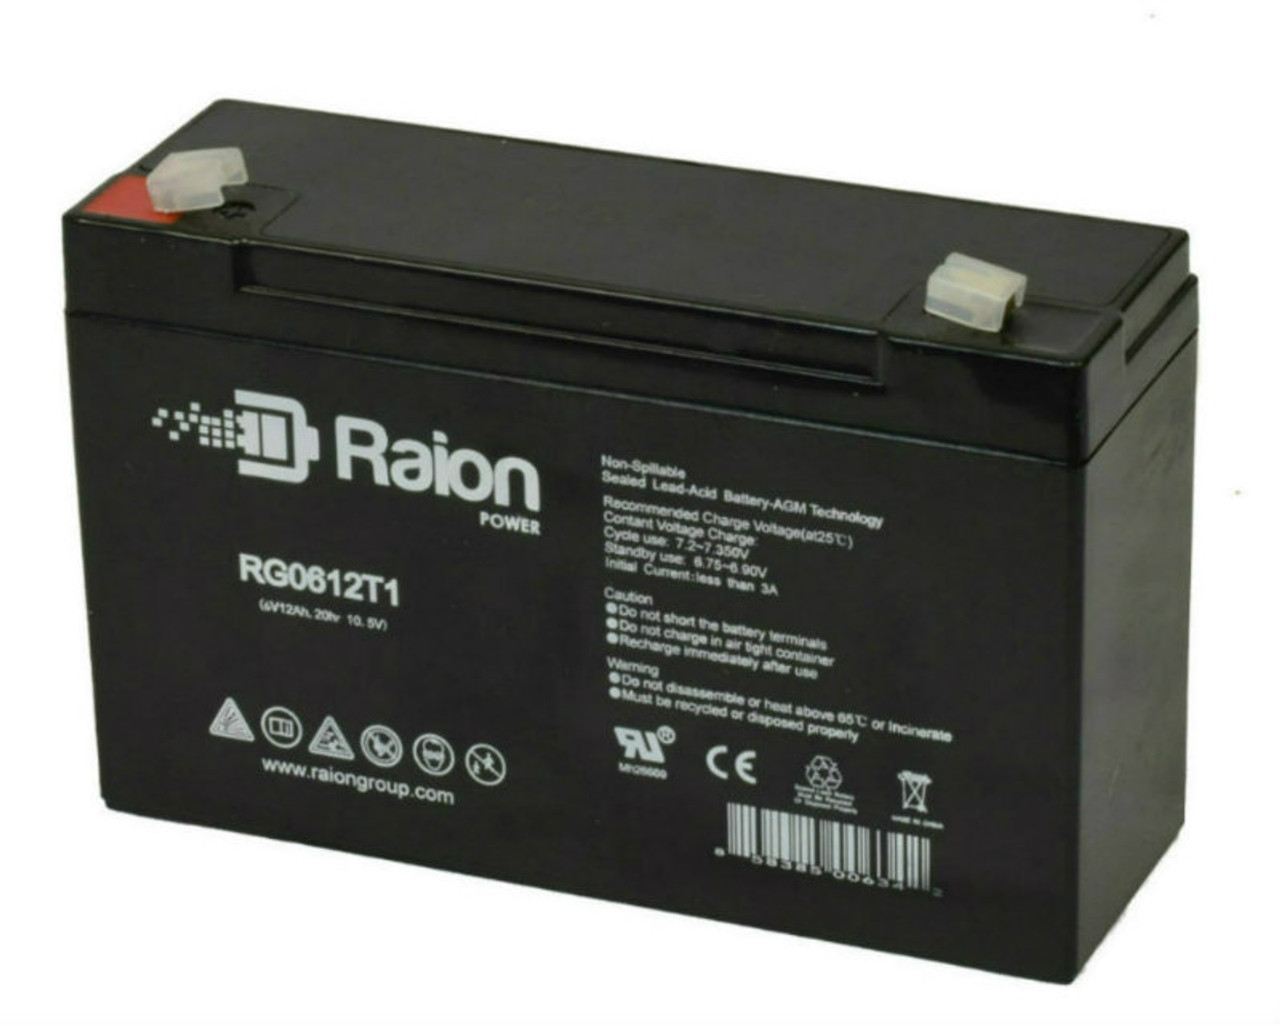 Raion Power RG06120T1 Replacement 6V 12Ah Emergency Light Battery for Siltron EM63